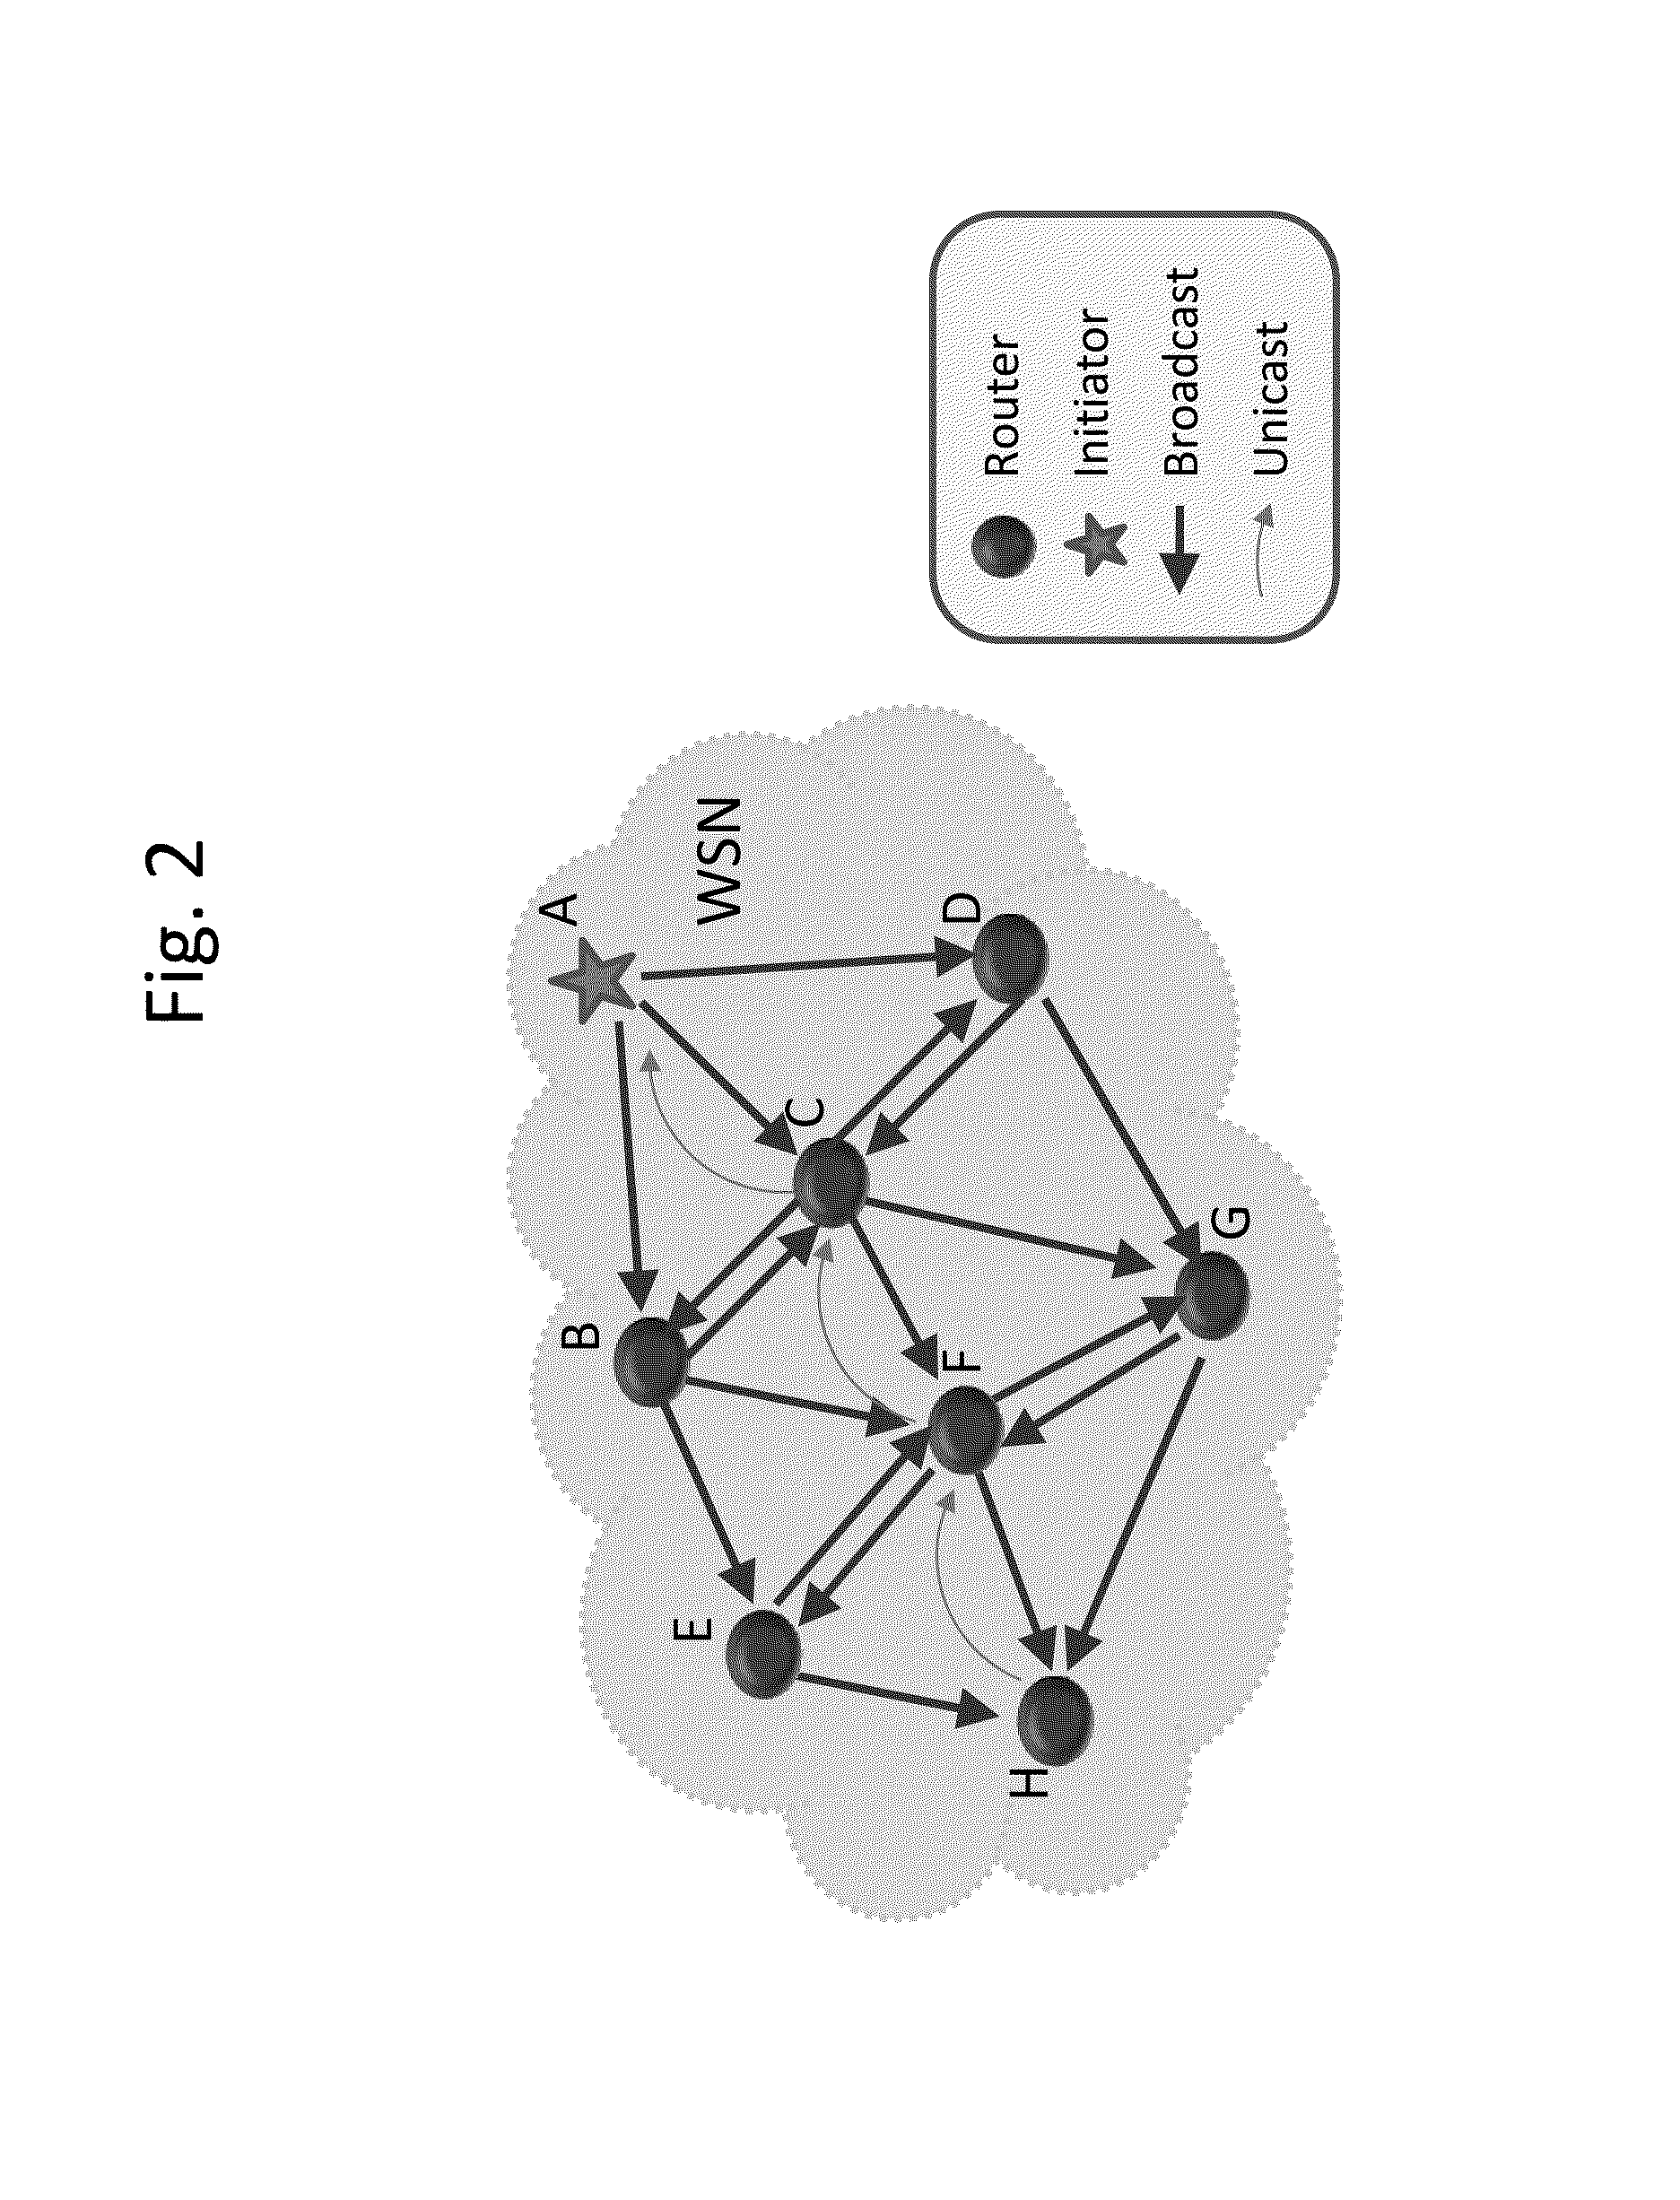 Hybrid routing and forwarding solution for a wireless sensor network